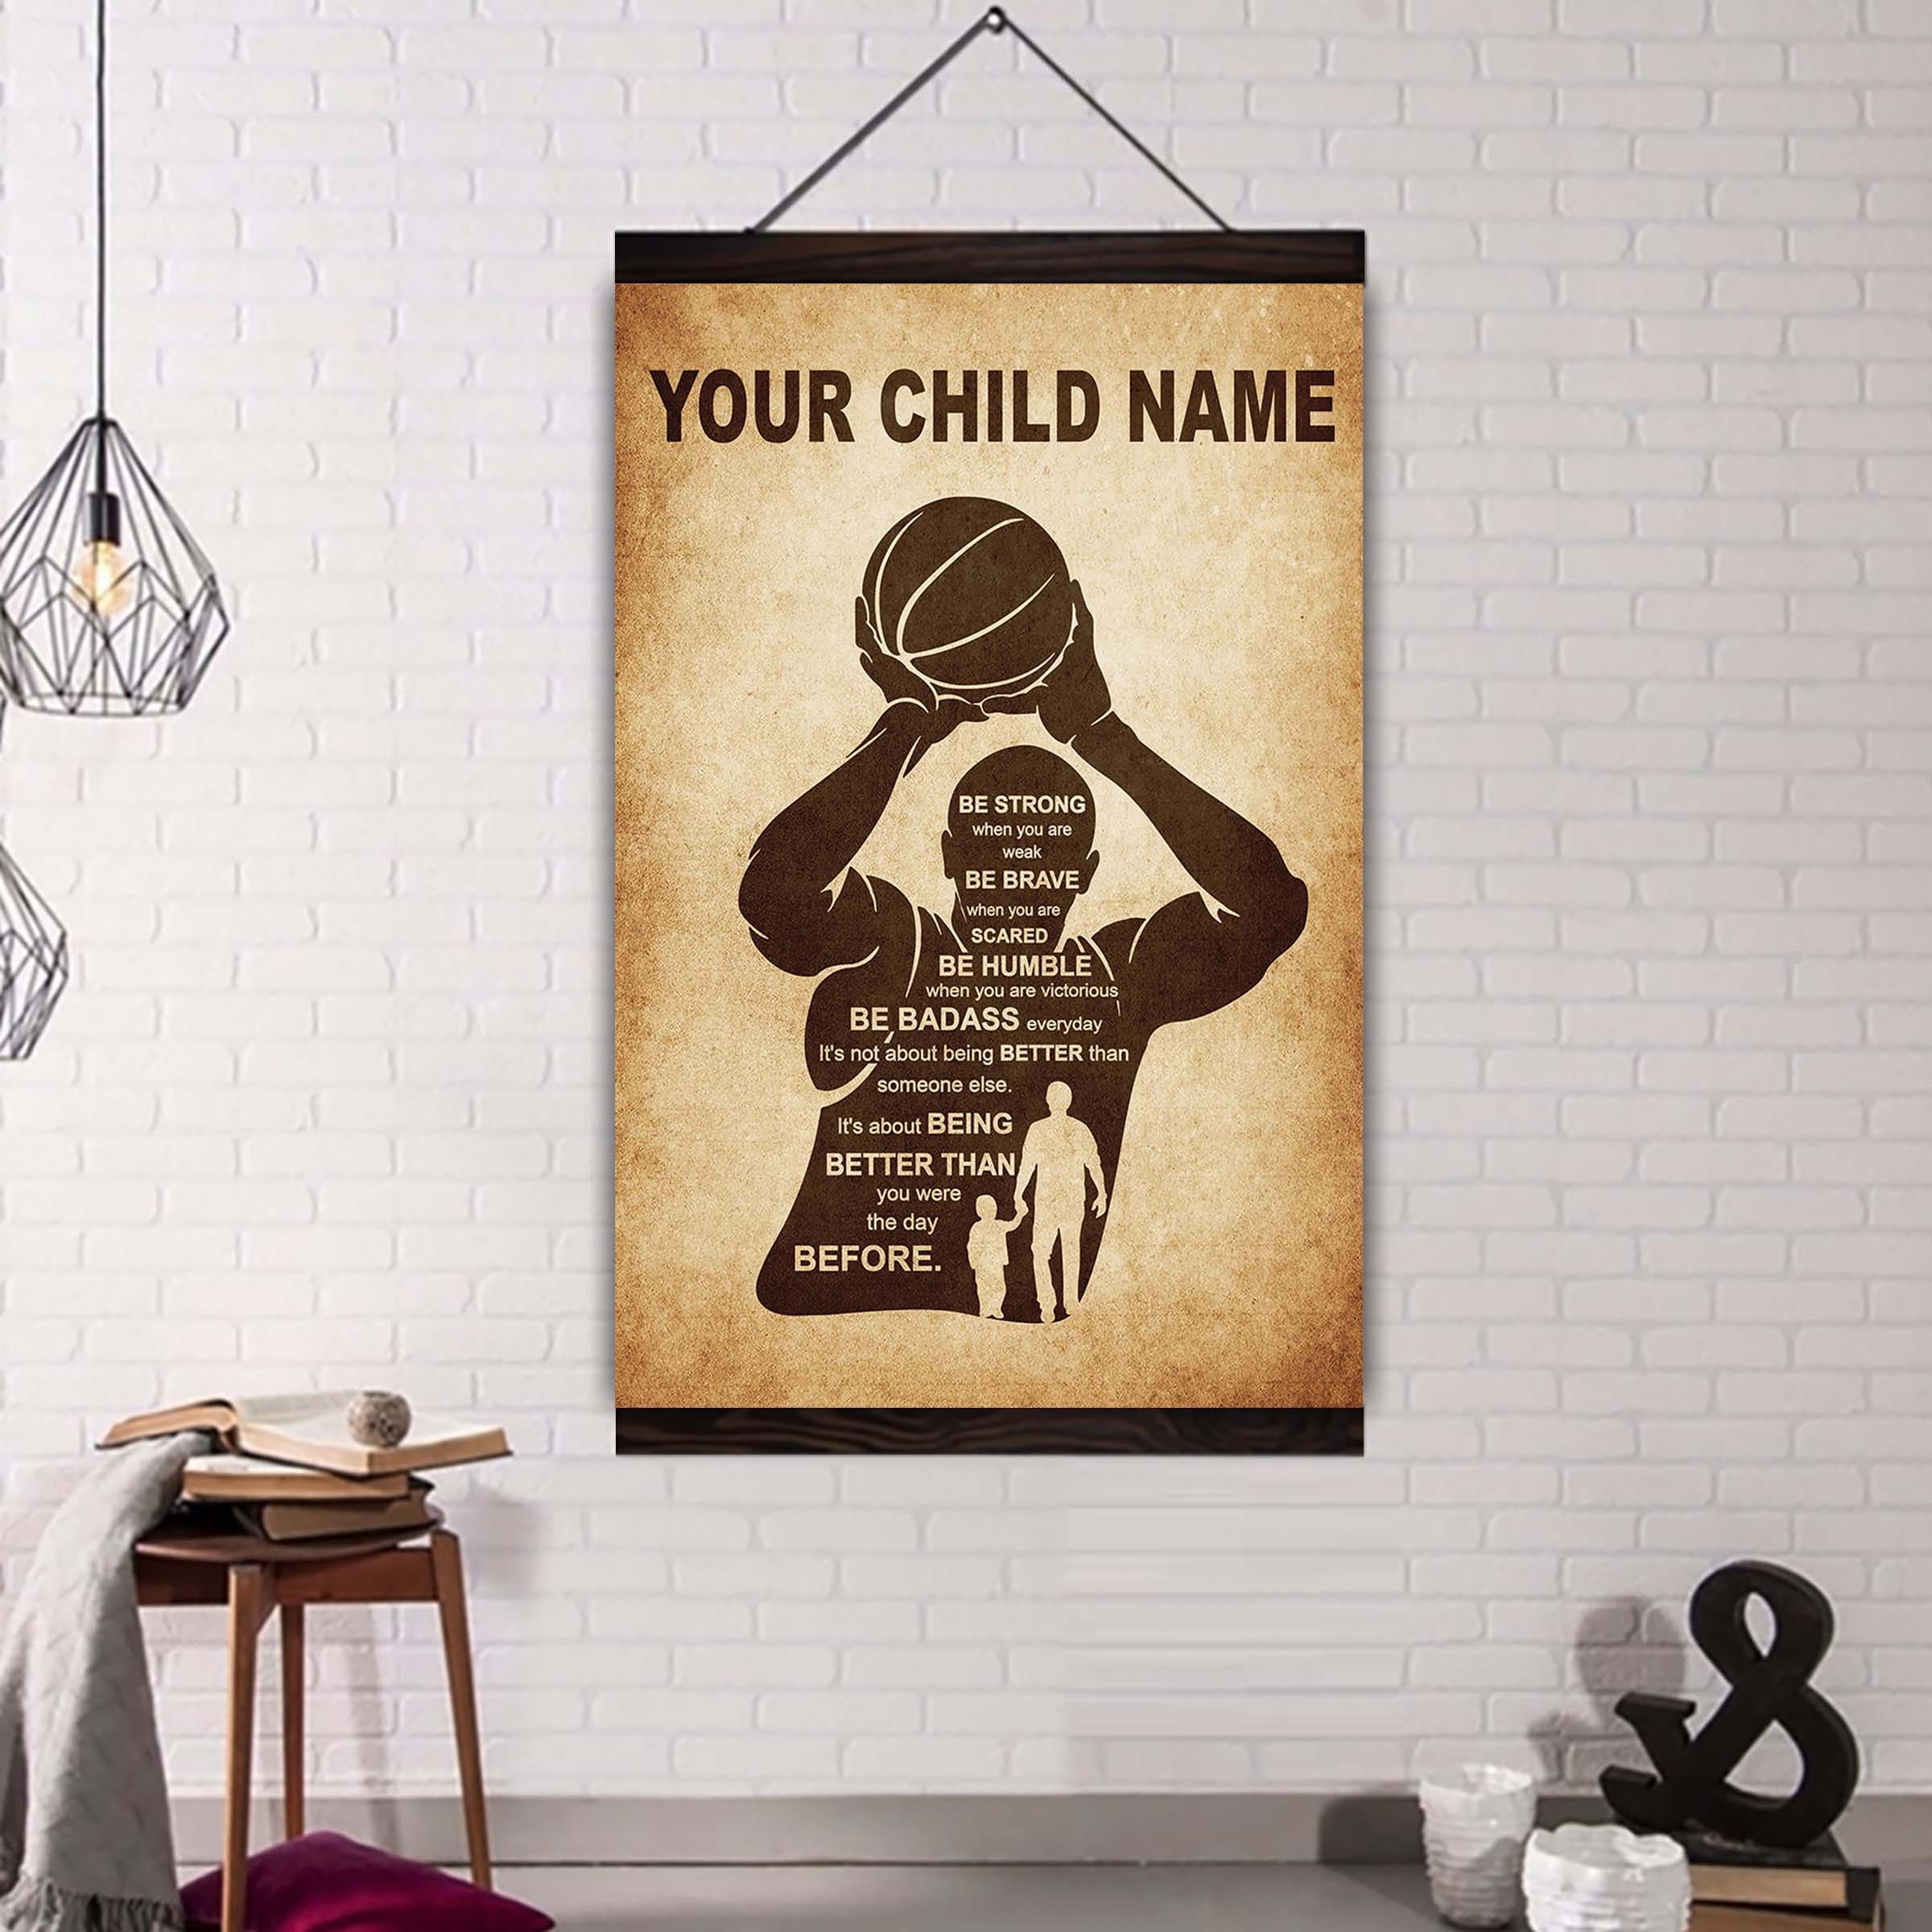 Soccer Personalized Your Child Name From Dad To Son Basketball Poster Canvas Be Strong When You Are Weak Be Brave When You Are Scared It's Not About Being Better Than Someone Else It's About Being Better Than You Were The Day Before